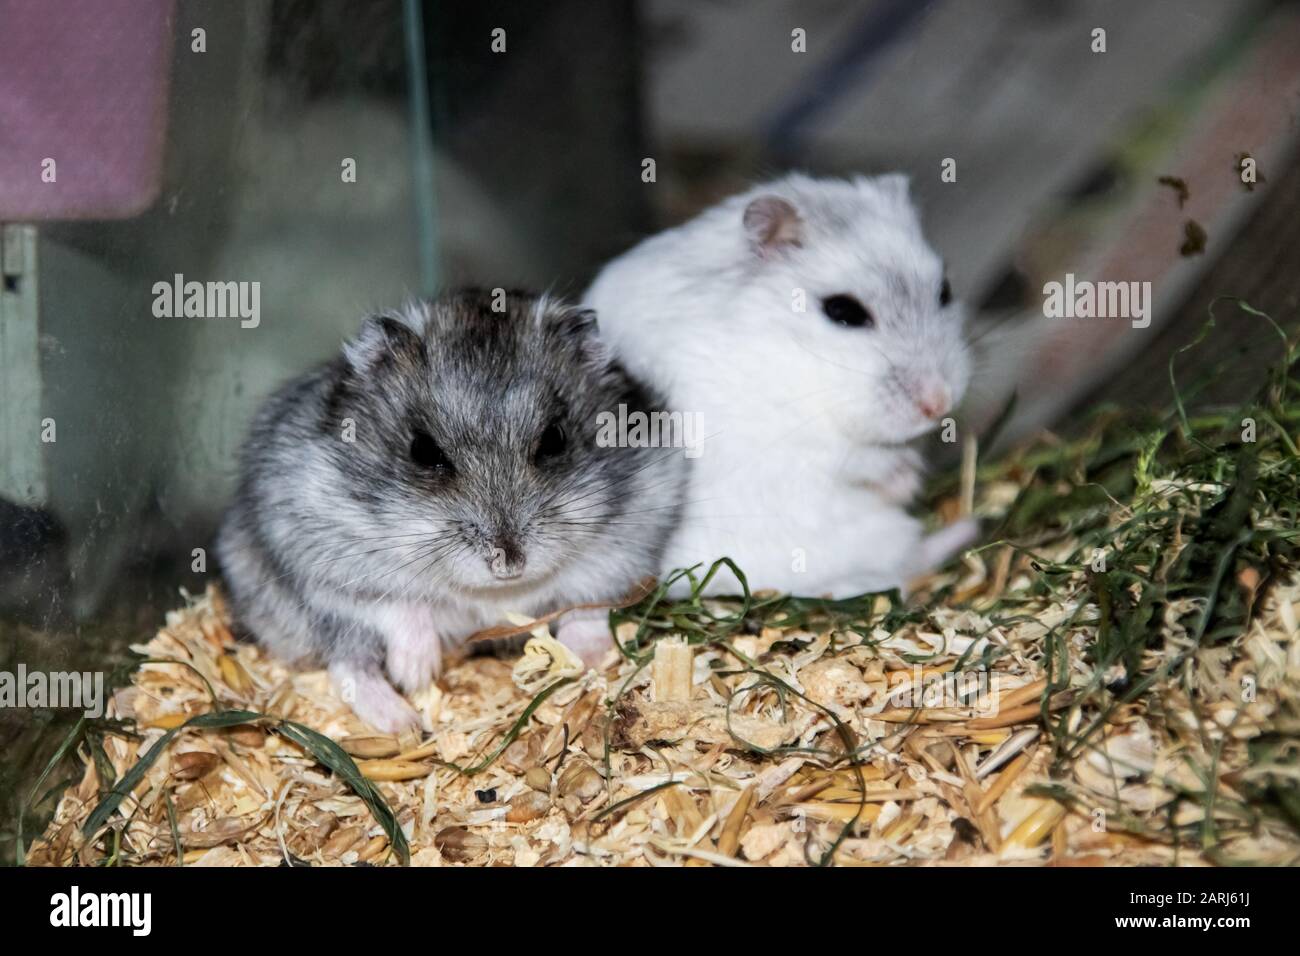 Sitting In A Cage High Resolution Stock Photography And Images Alamy